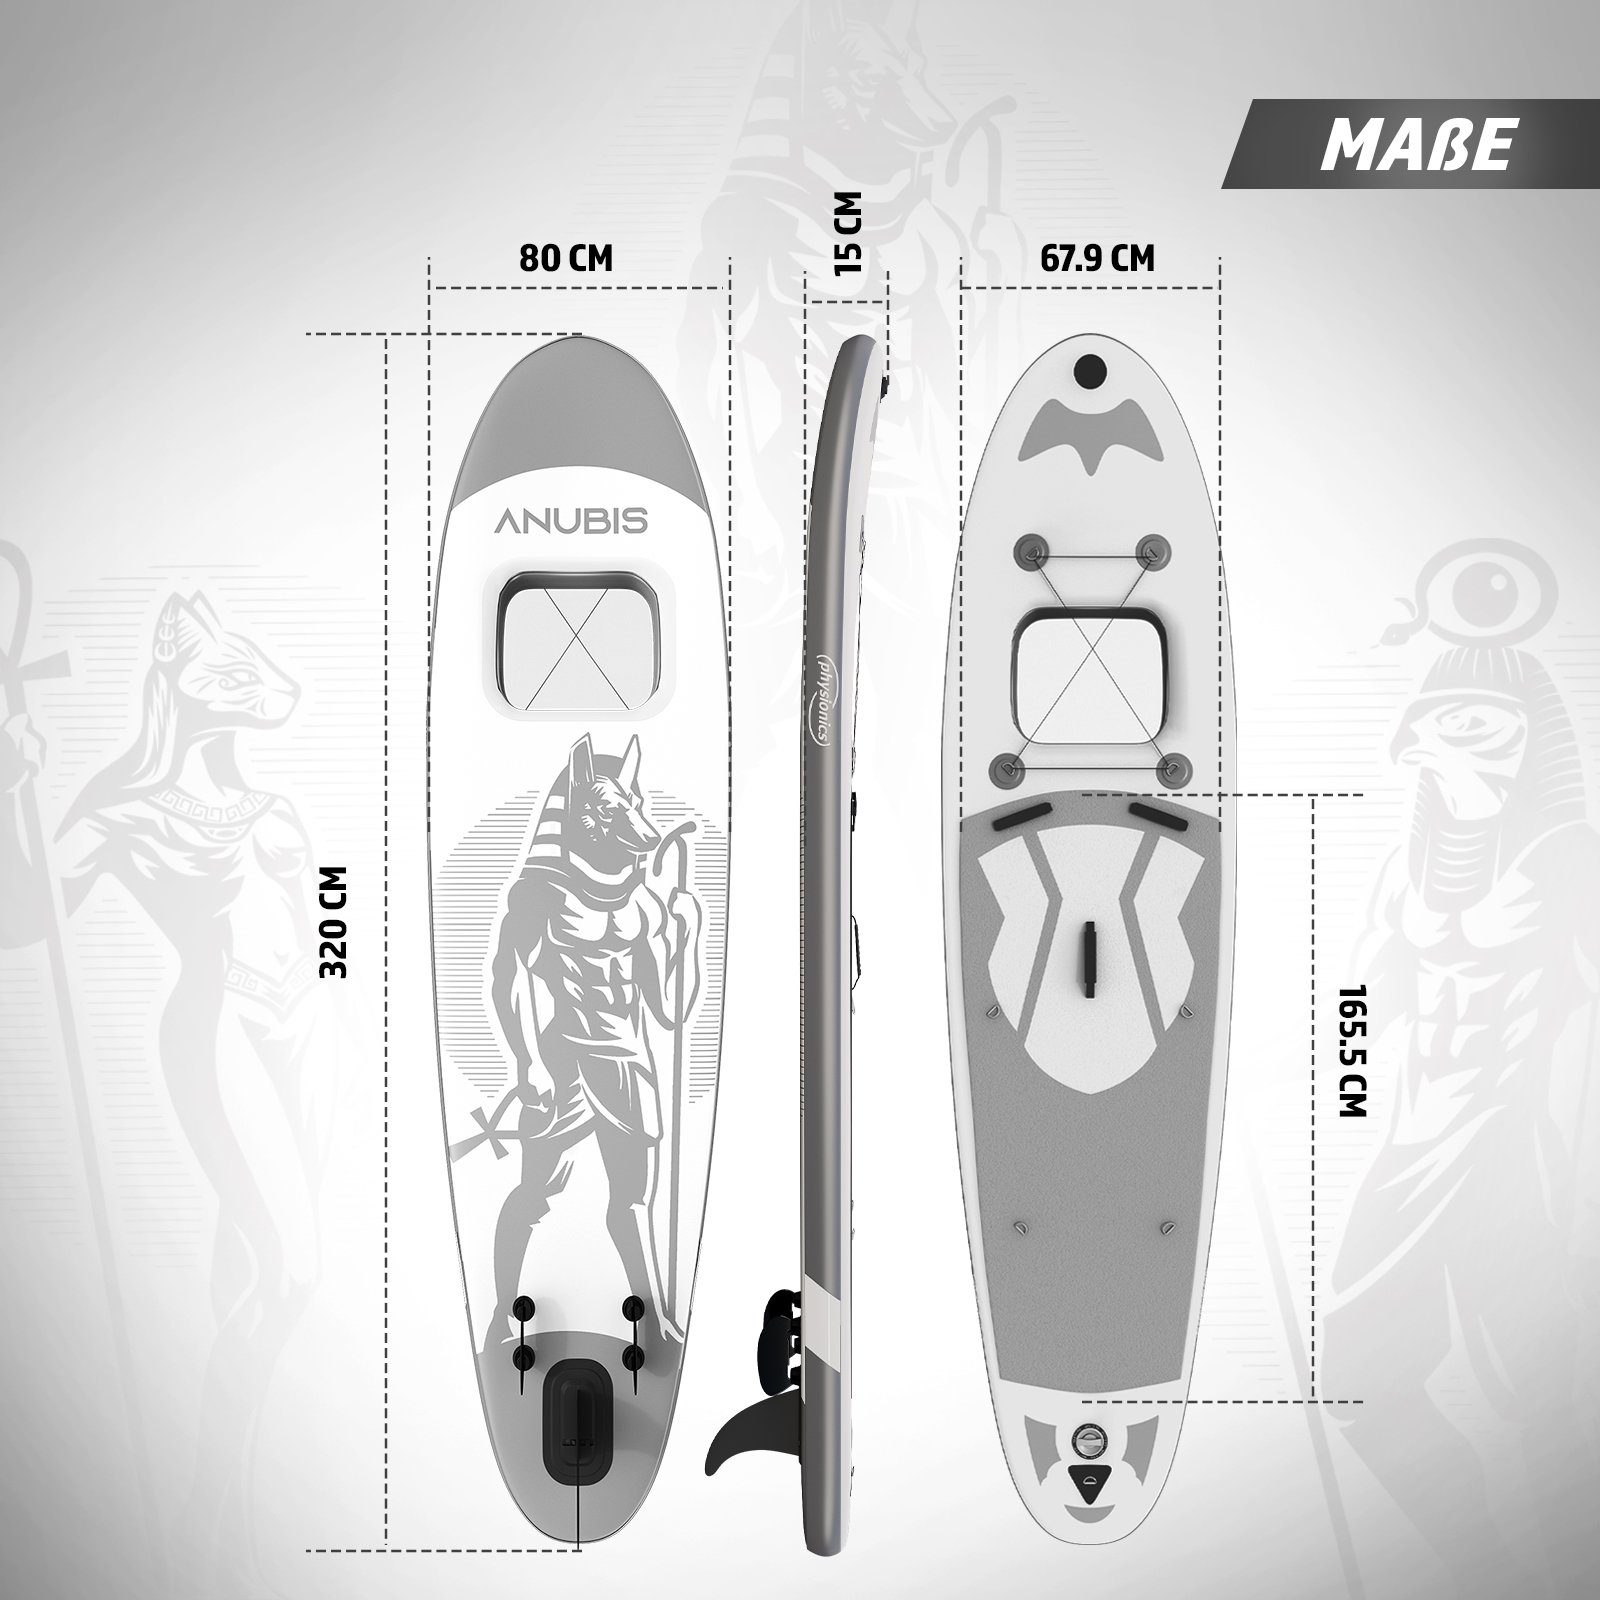 Board Physionics SUP-Board SUP Aufblasbares Stand Anubis(Silber) 320cm Board Paddle Up